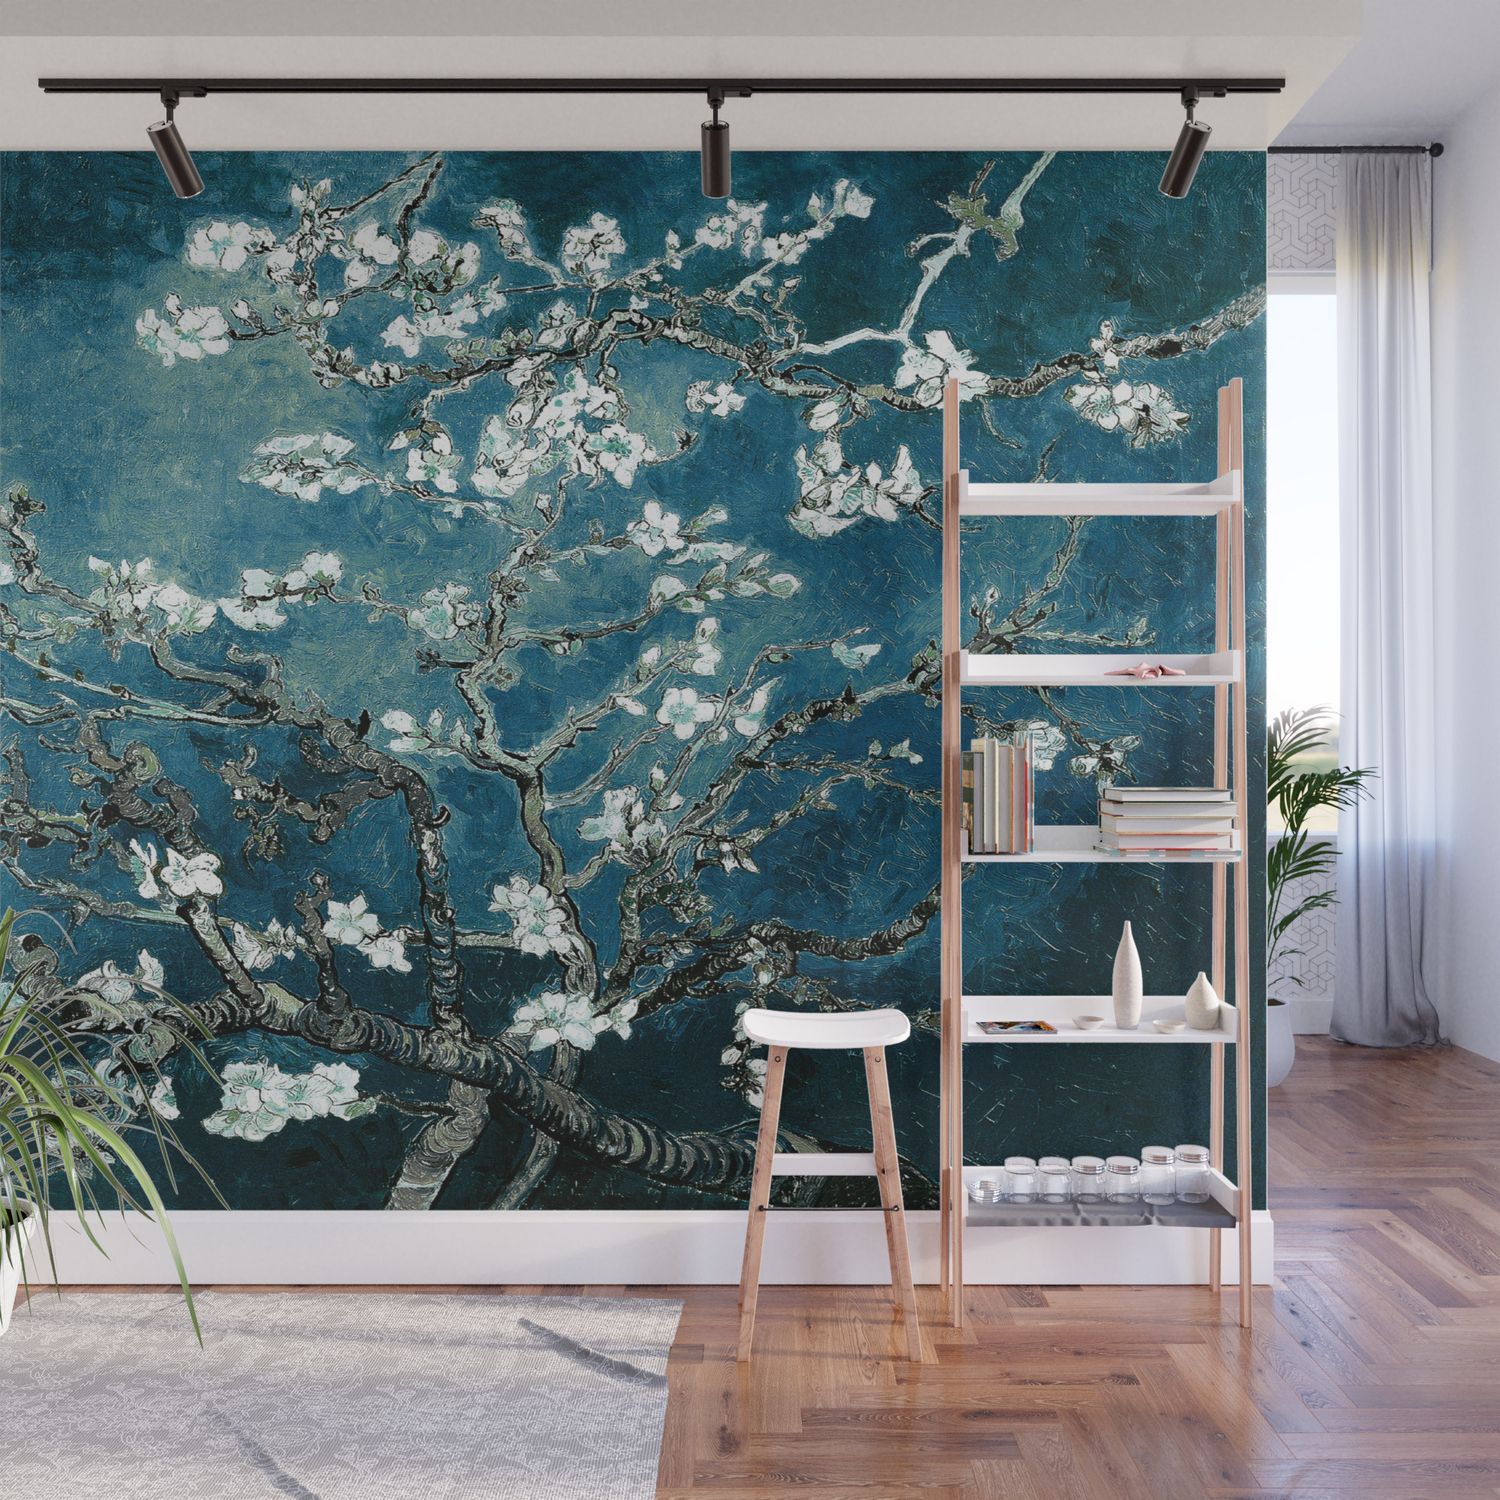 Van Gogh Almond Blossoms : Dark Teal Wall Muralpurevintagelove |  Society6 In 2017 Almond Blossoms Wall Art (View 20 of 20)